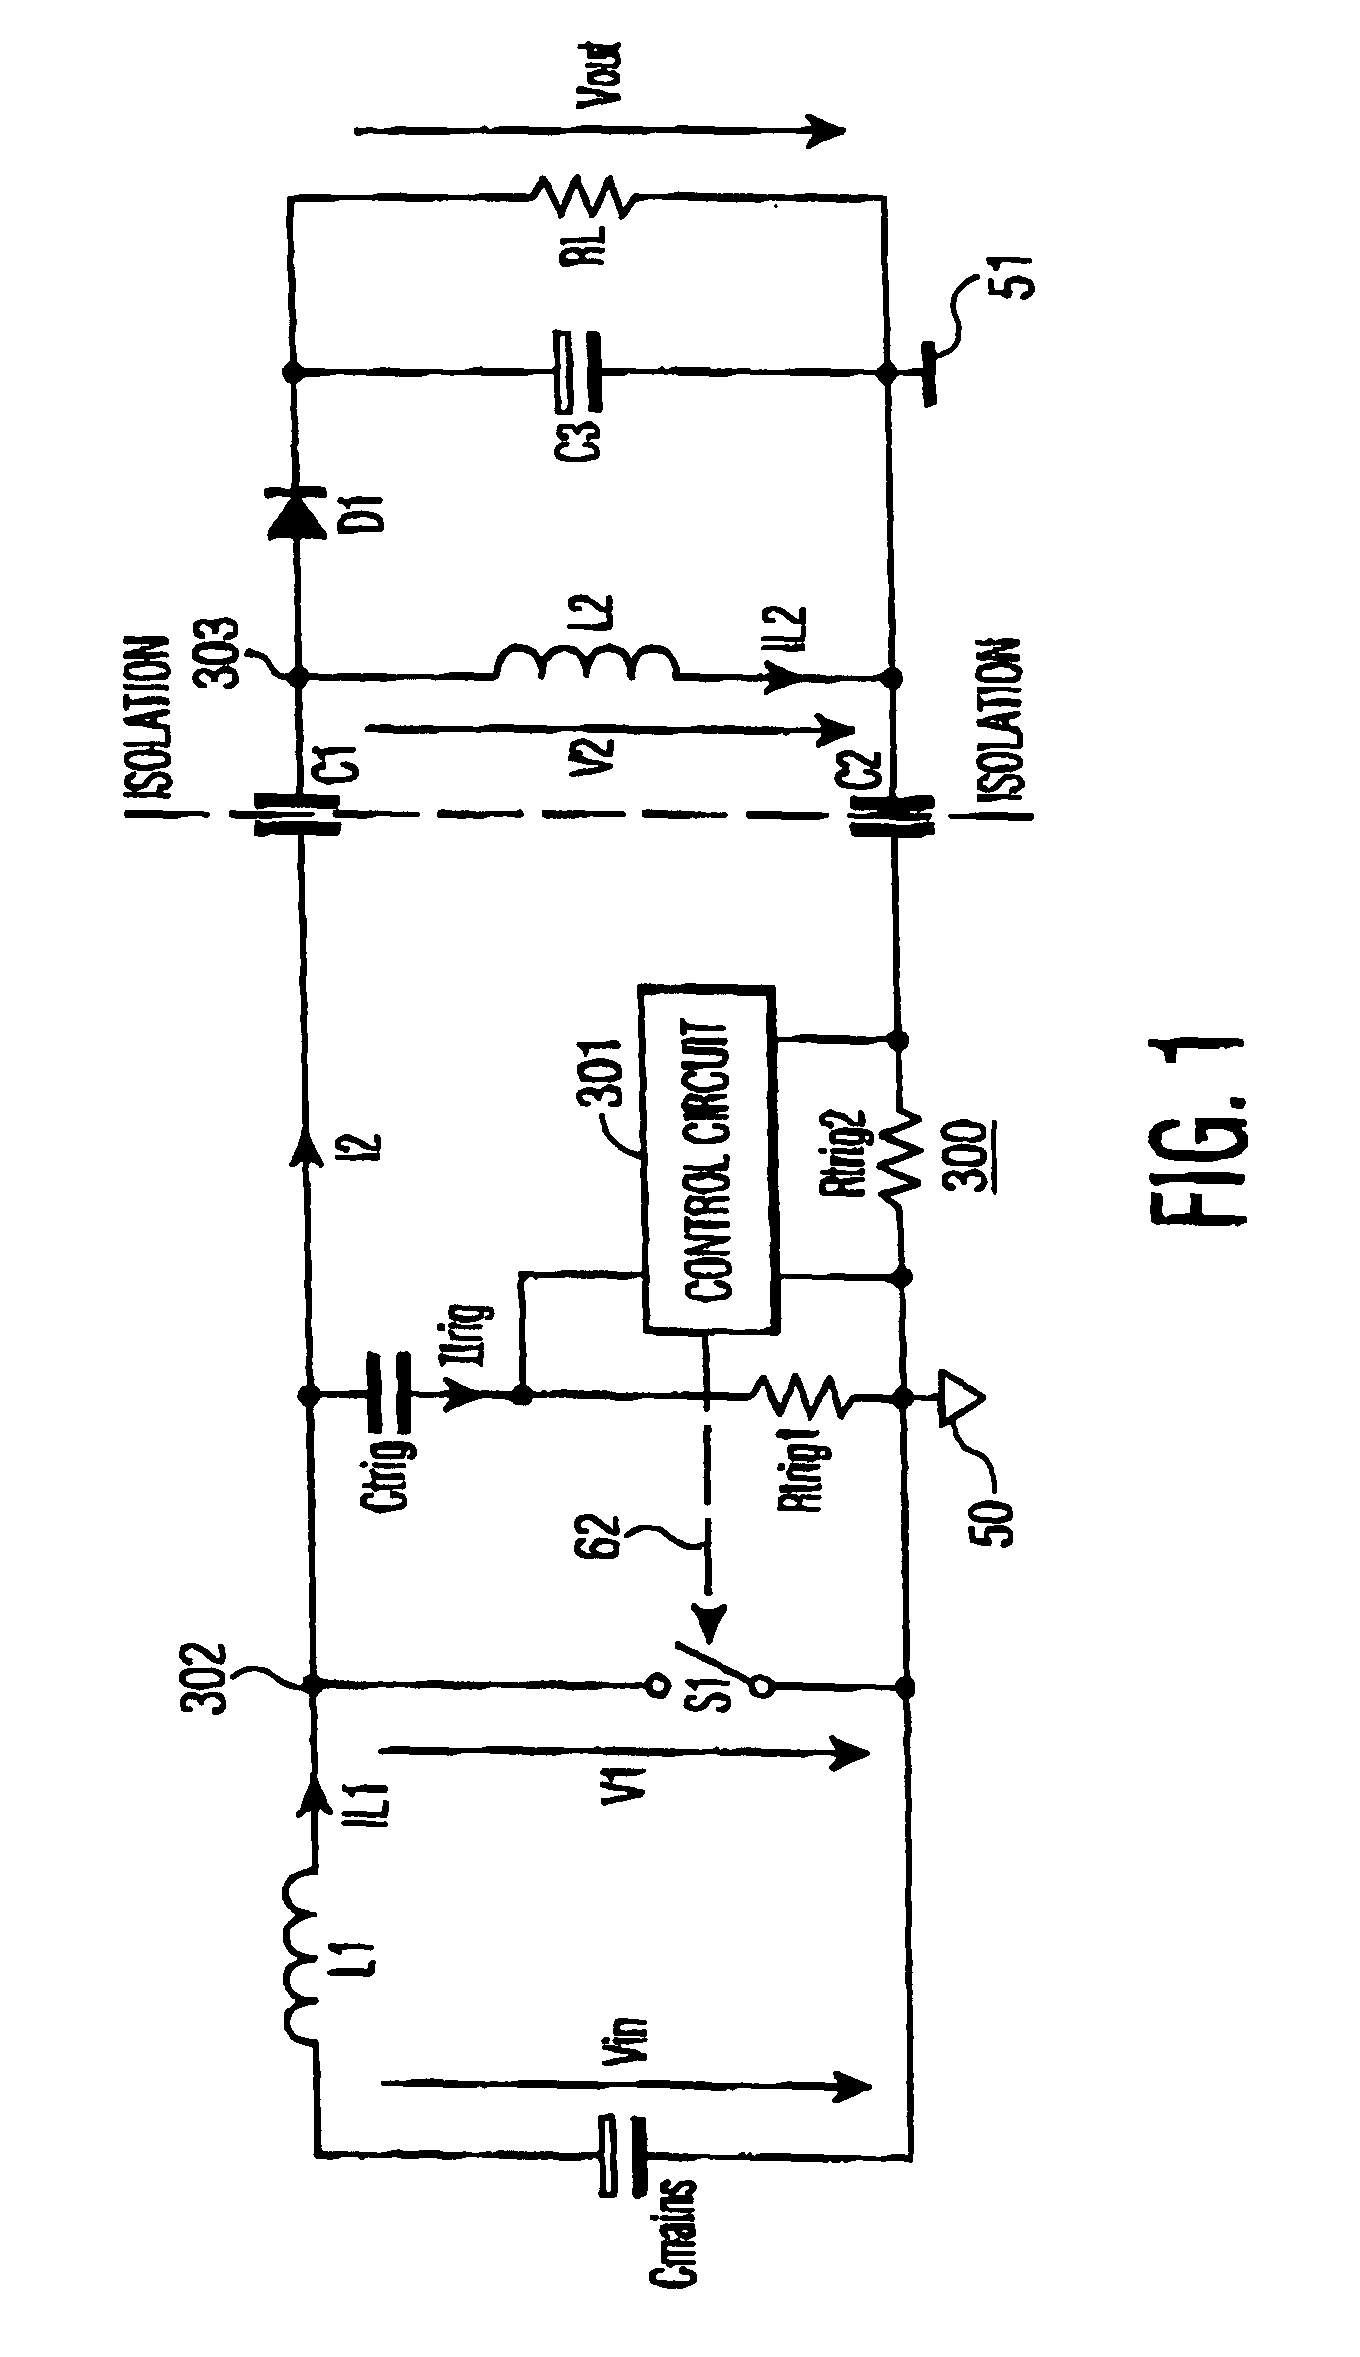 Capacitively coupled power supply